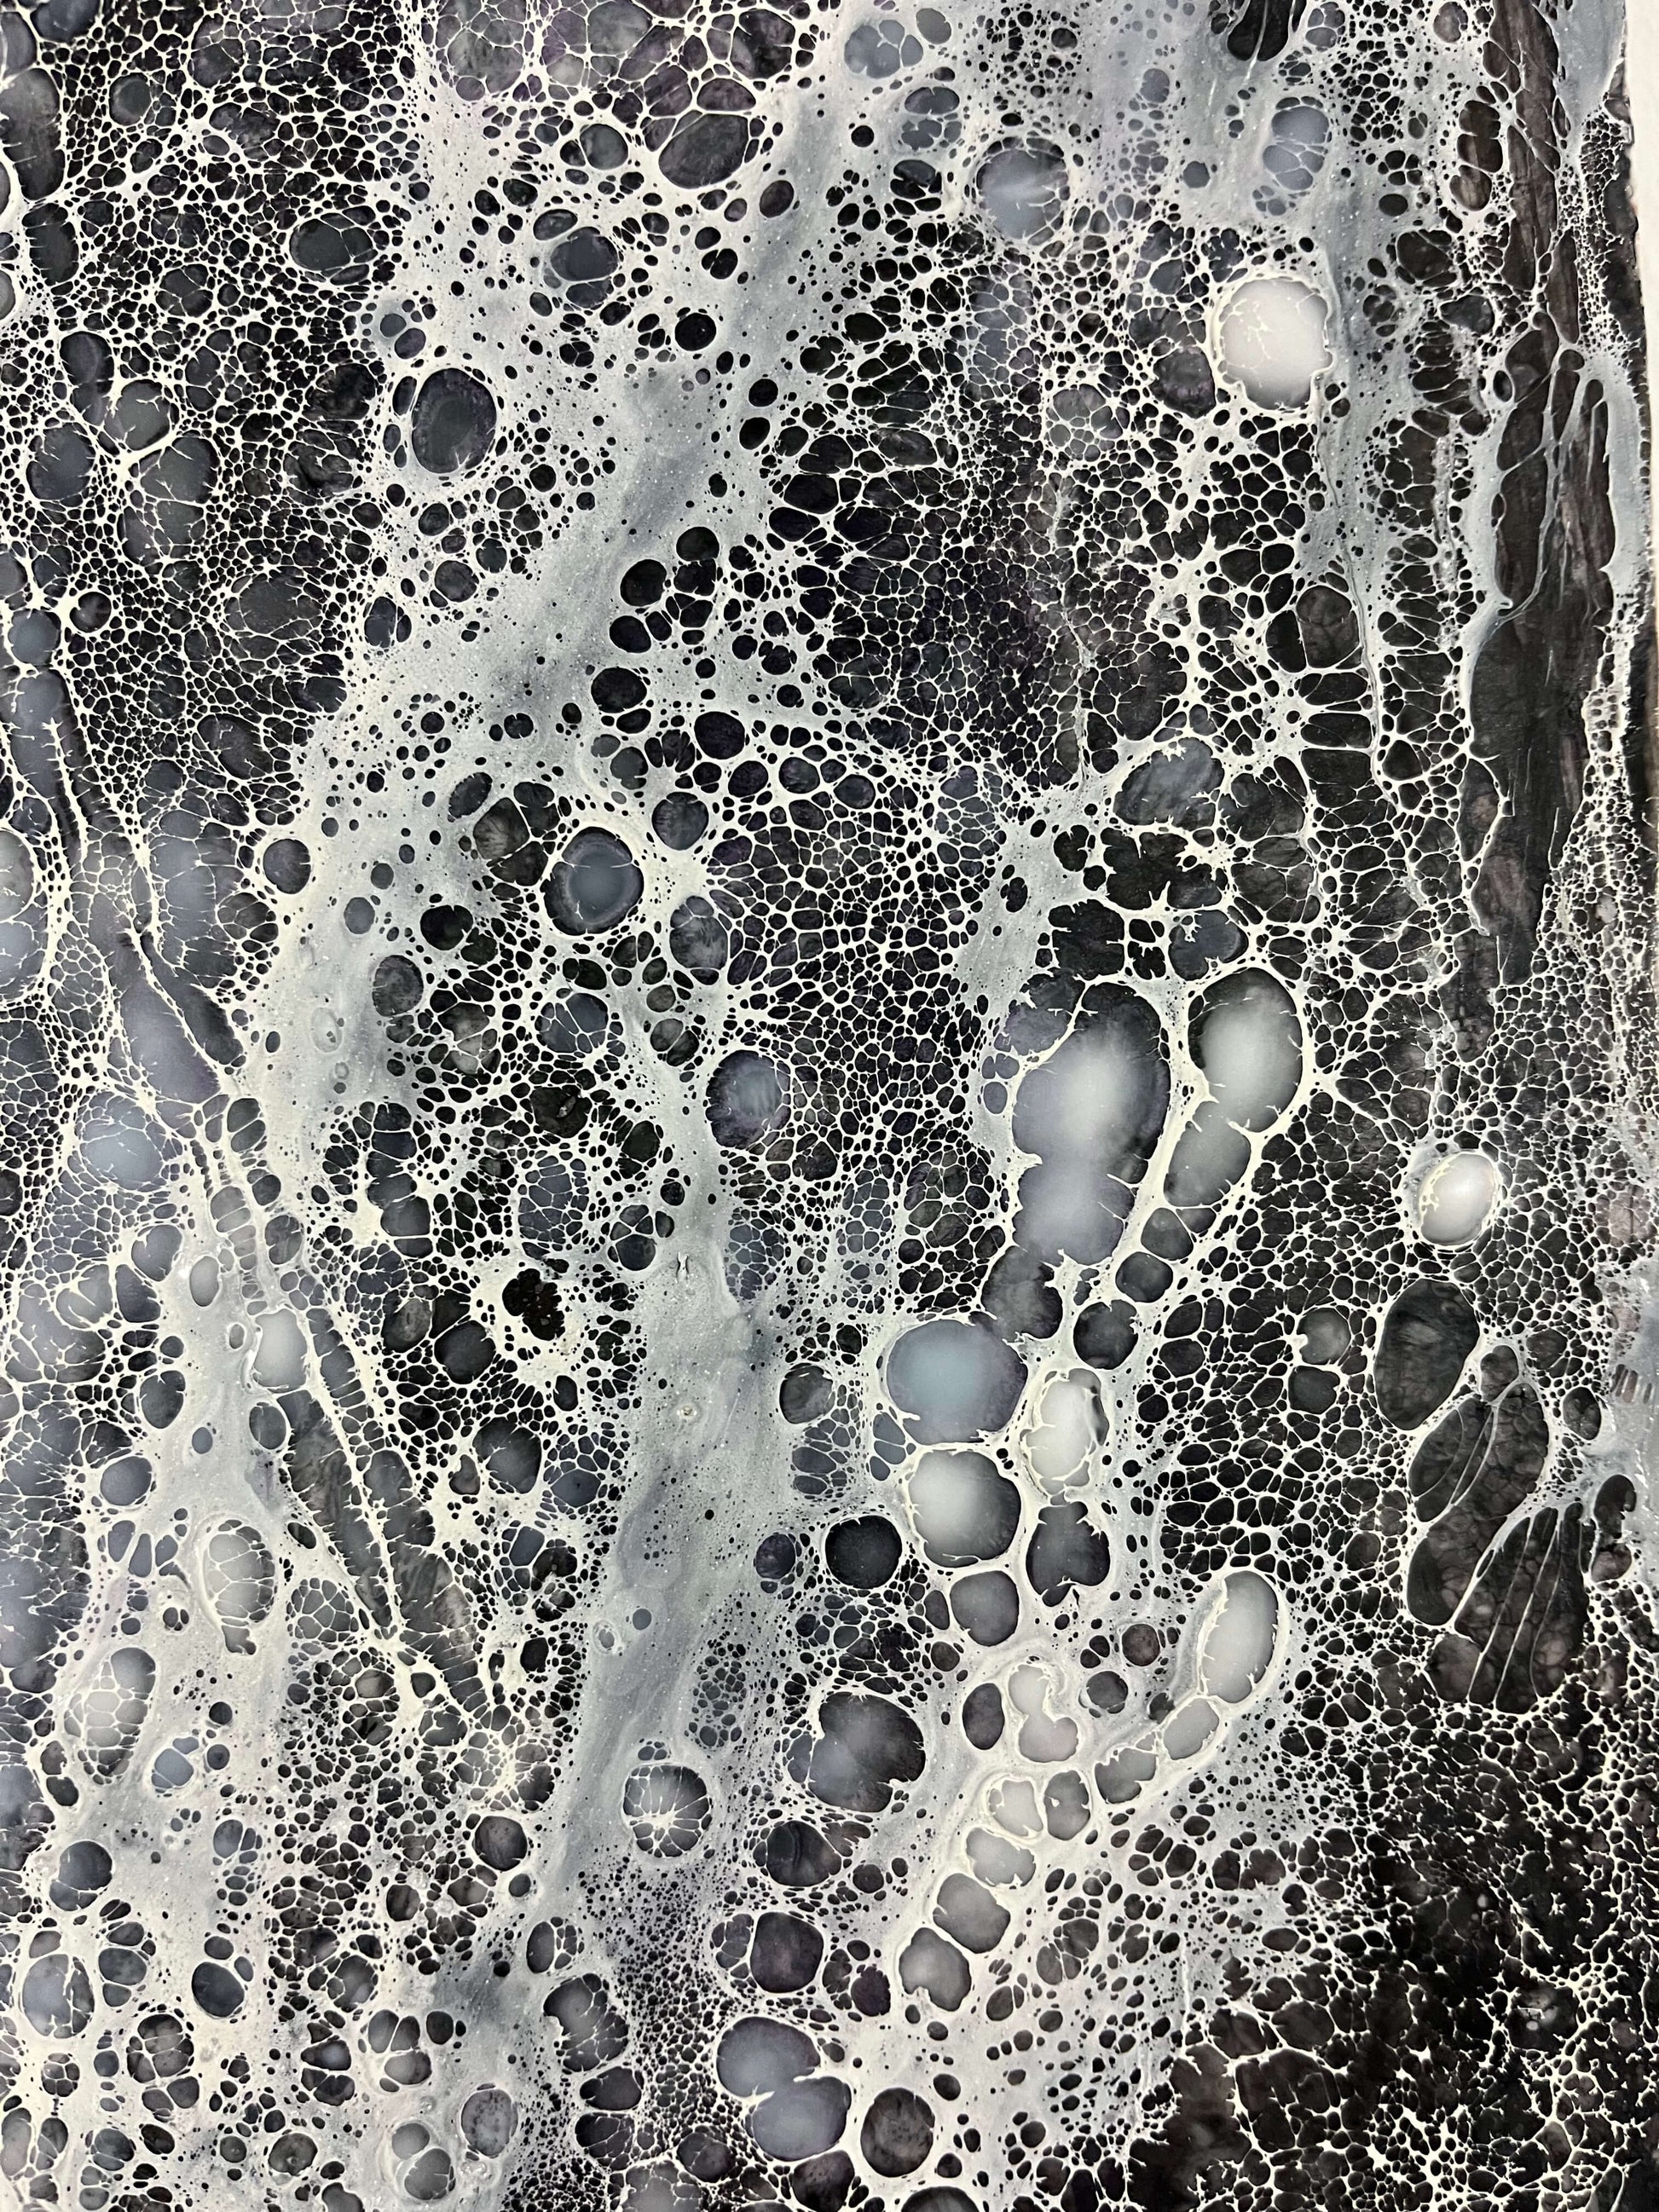 Close up.Abstract Encaustic Painting, 30x40in. Created with beeswax, damar resin, dry pigments and shellac on cradled wood panel. This piece is very striking, it is monochromatic painted in colours varying from black, grey and white. Shellac lace-like cells are burned in a direction that creates movement across the painting. Hanging hardware is included